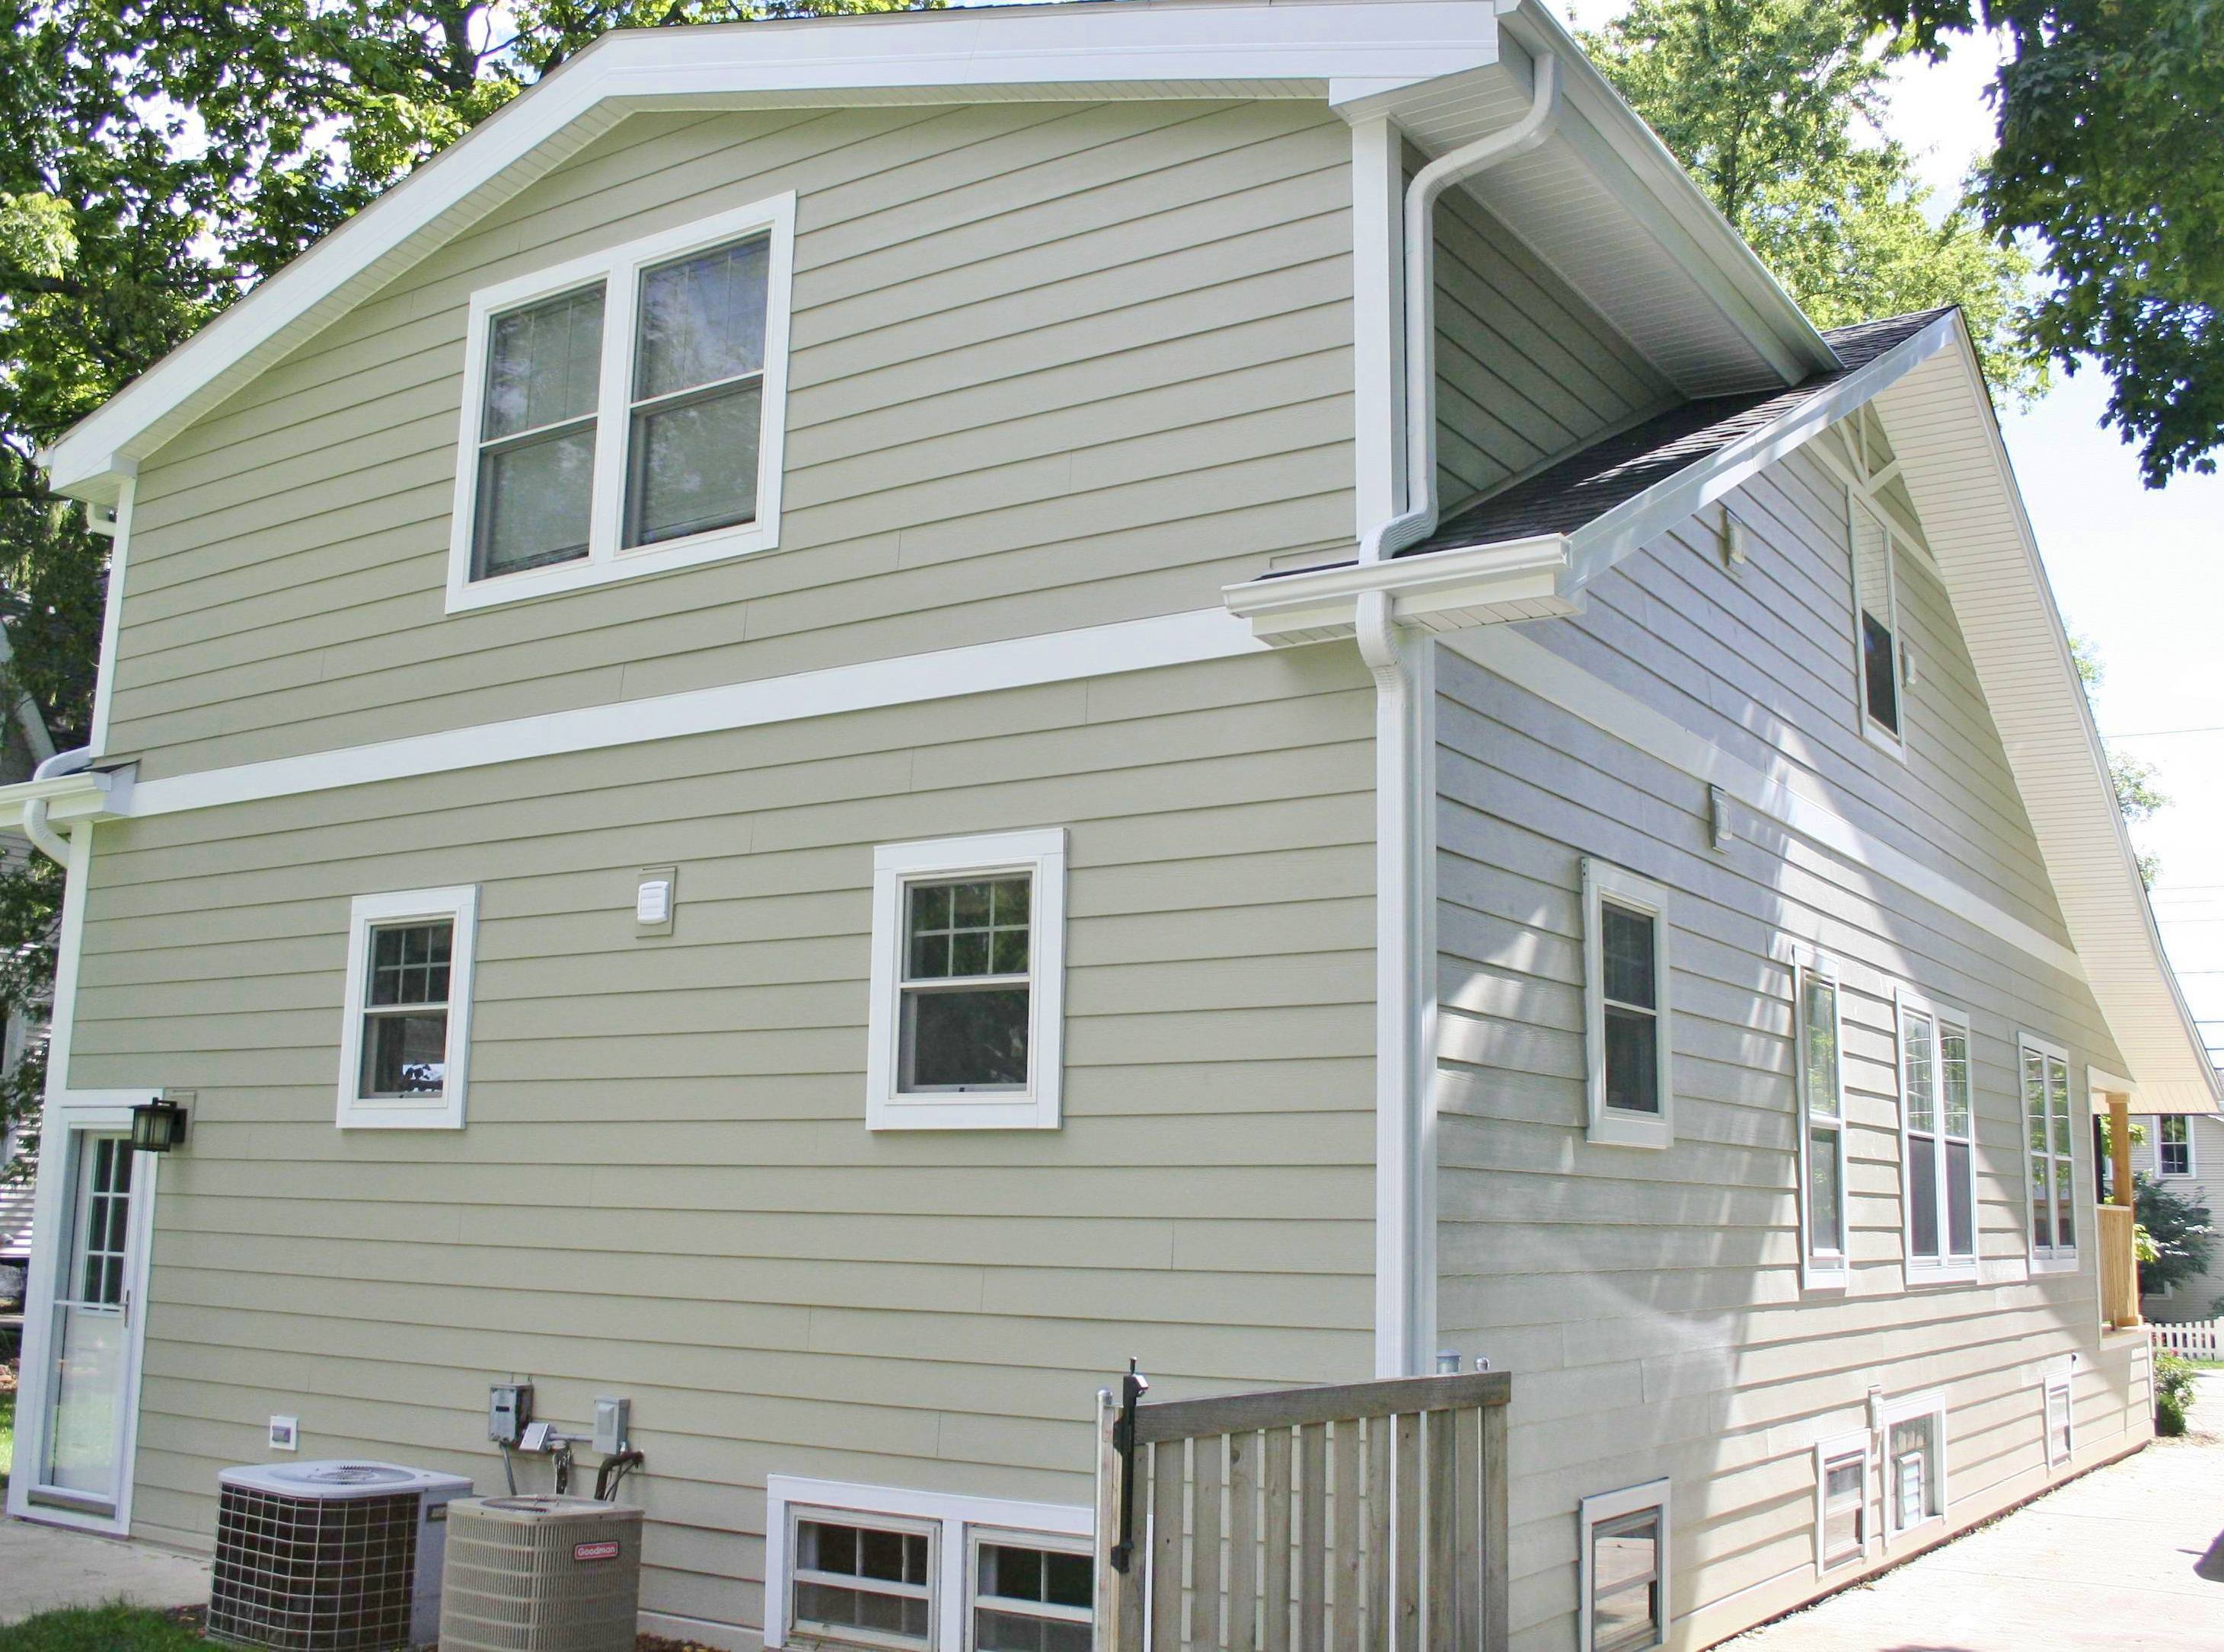 Consulting With Your HOA Before Installing Siding Can Save You